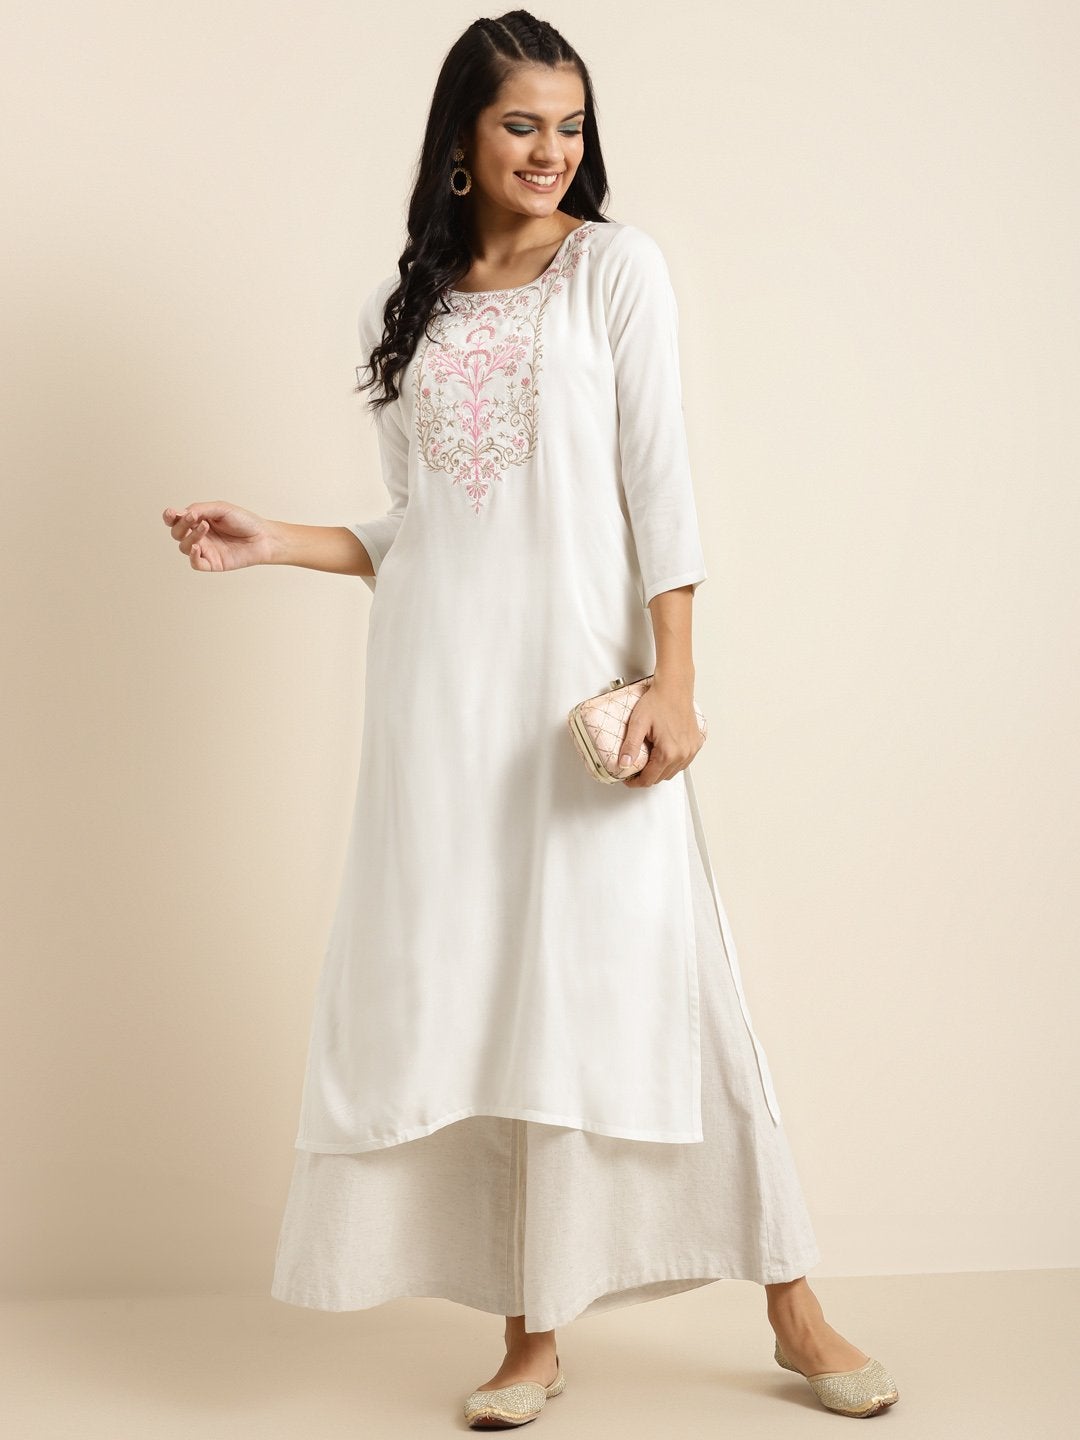 Women's Off White Floral Embroidery Straight Kurta - SHAE